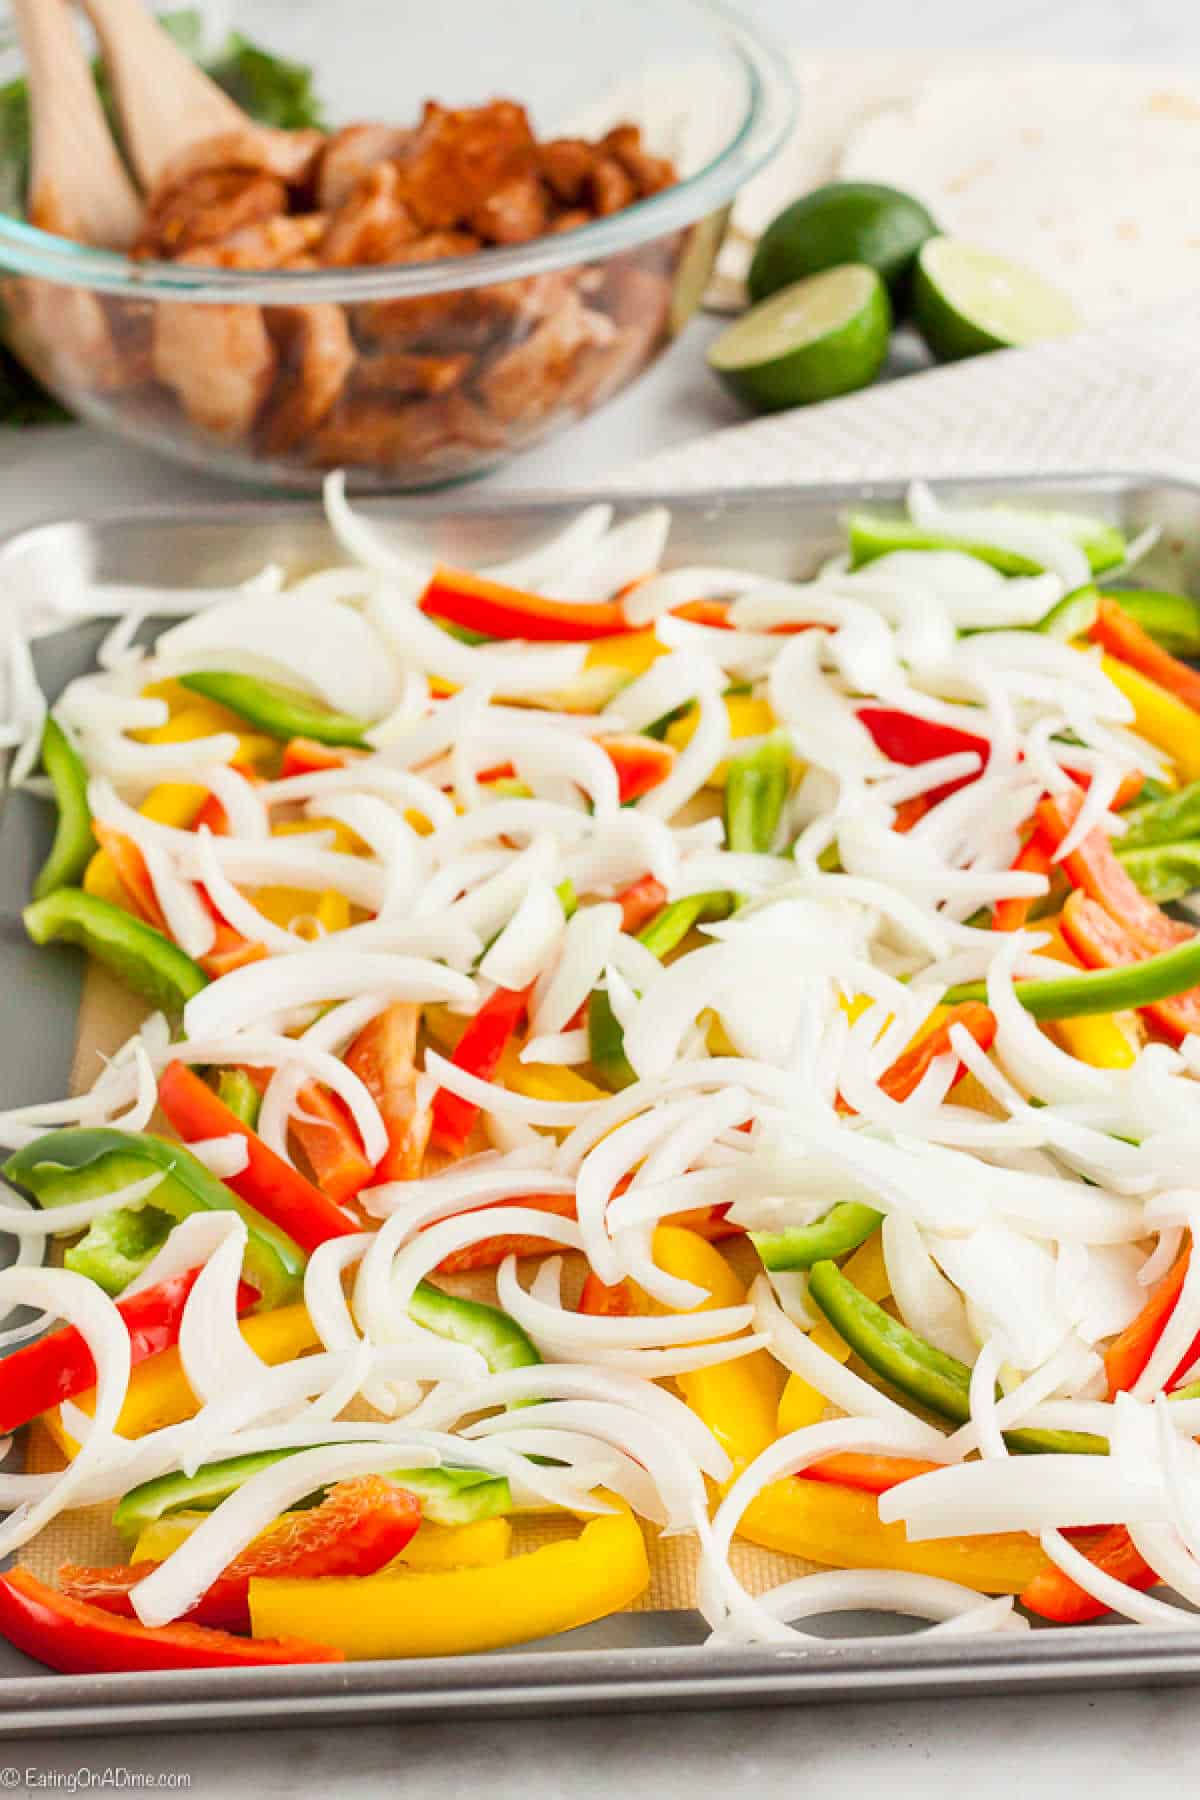 Sheet Pan Chicken Fajitas only takes a few ingredients and less than 25 minutes. Enjoy this delicious chicken mixture with tortillas or serve it alone.